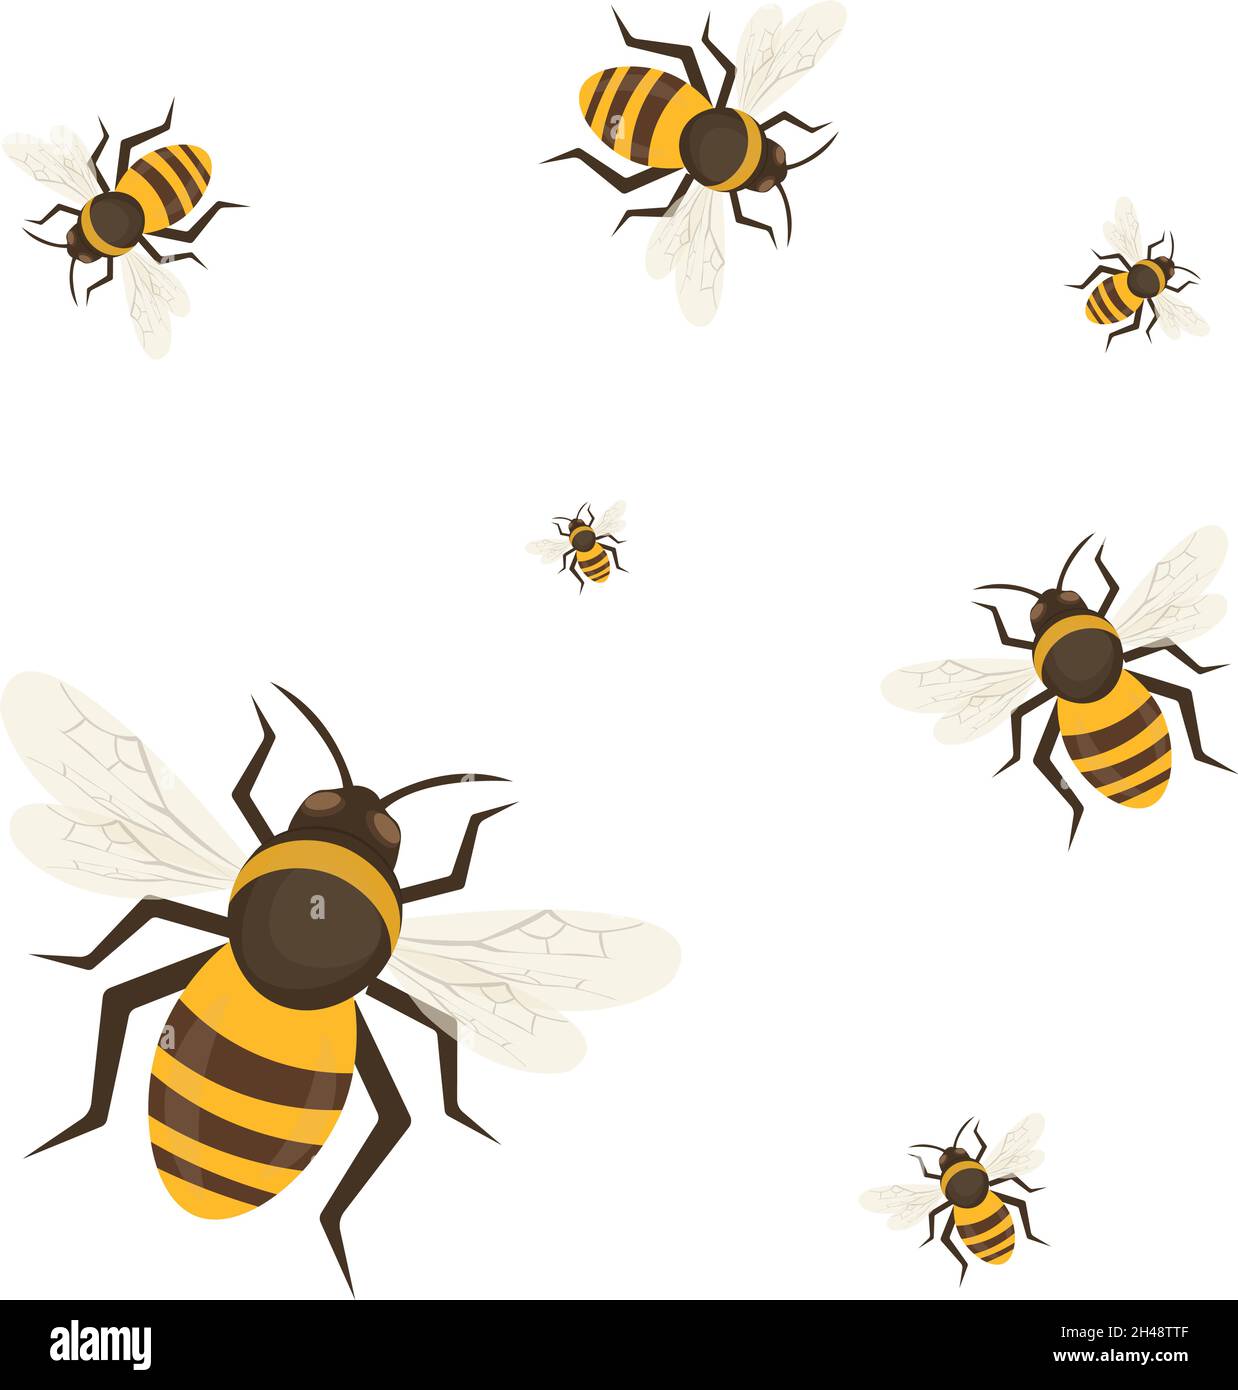 Honey bees, illustration, vector on a white background. Stock Vector